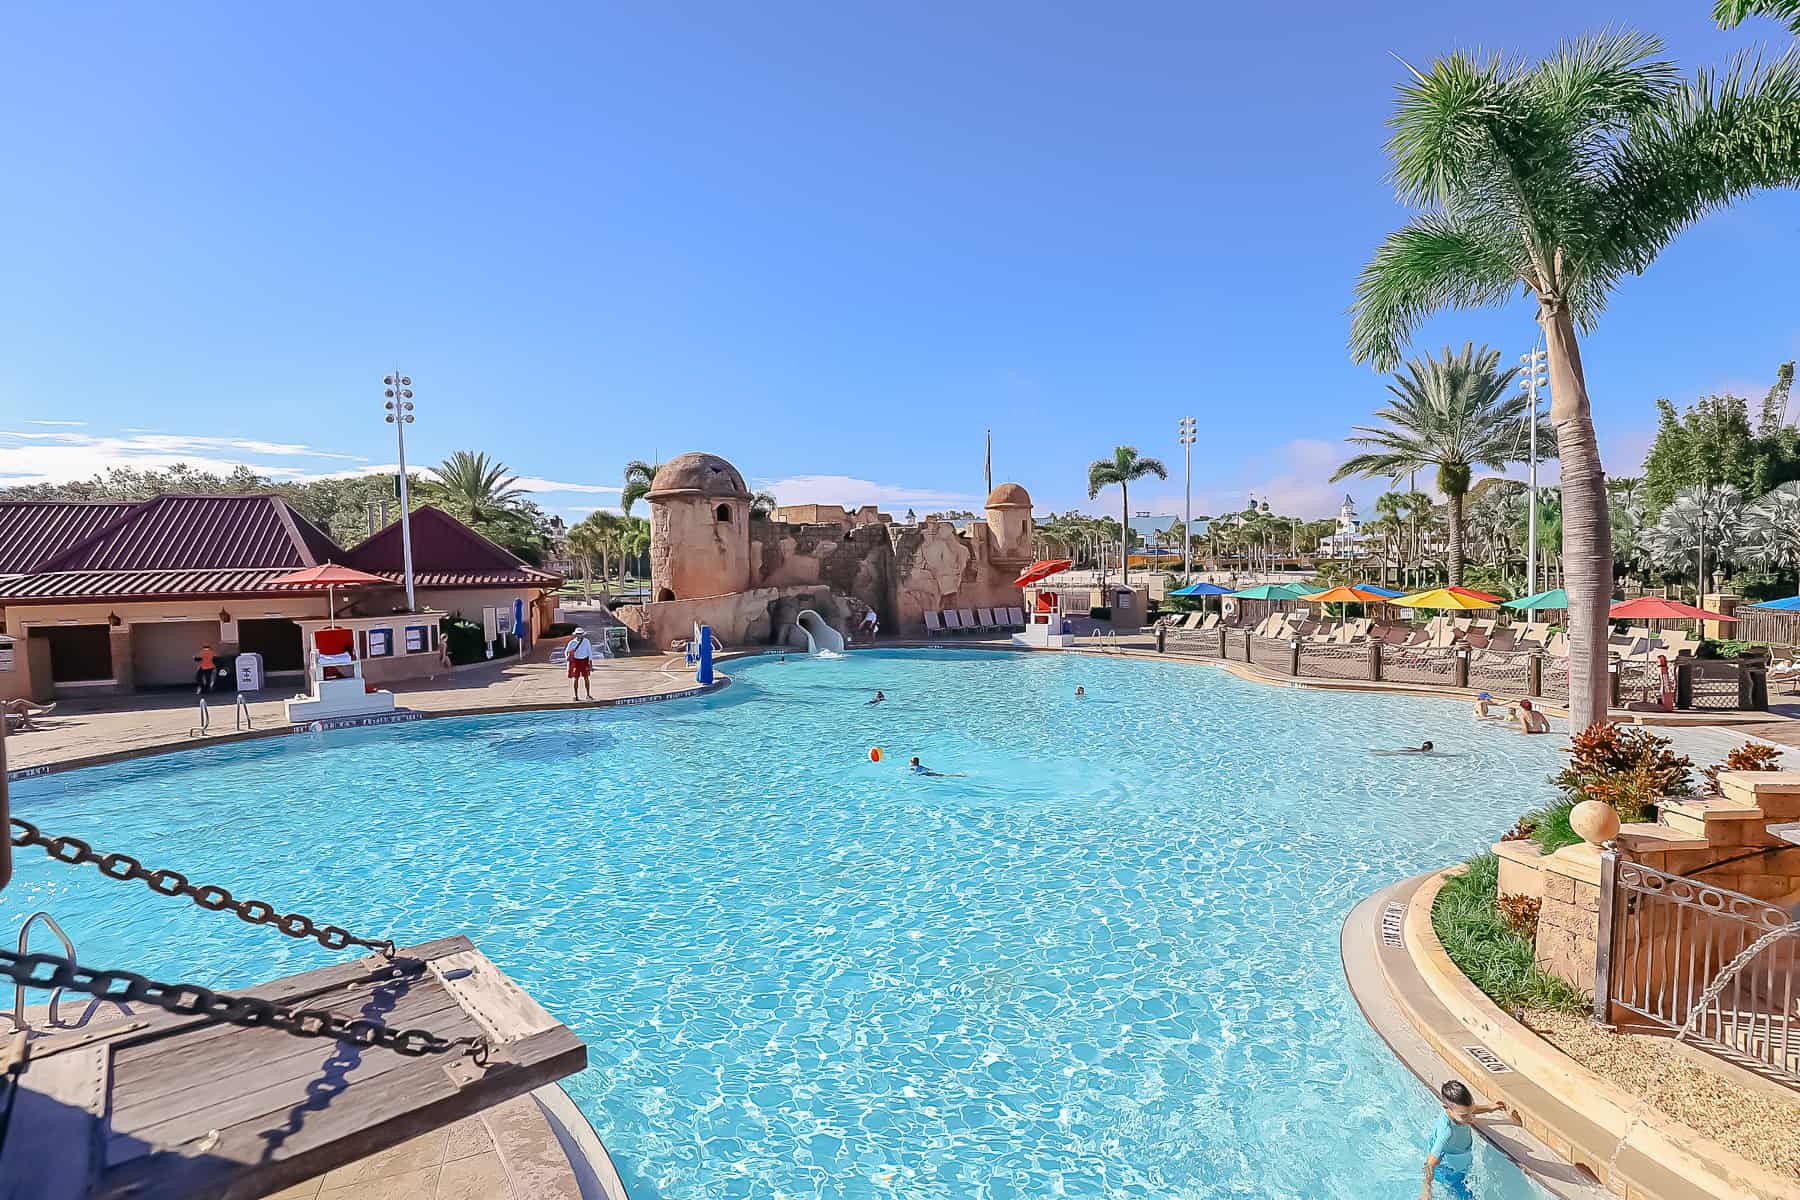 overview that shows how large Disney's Caribbean Beach pool is